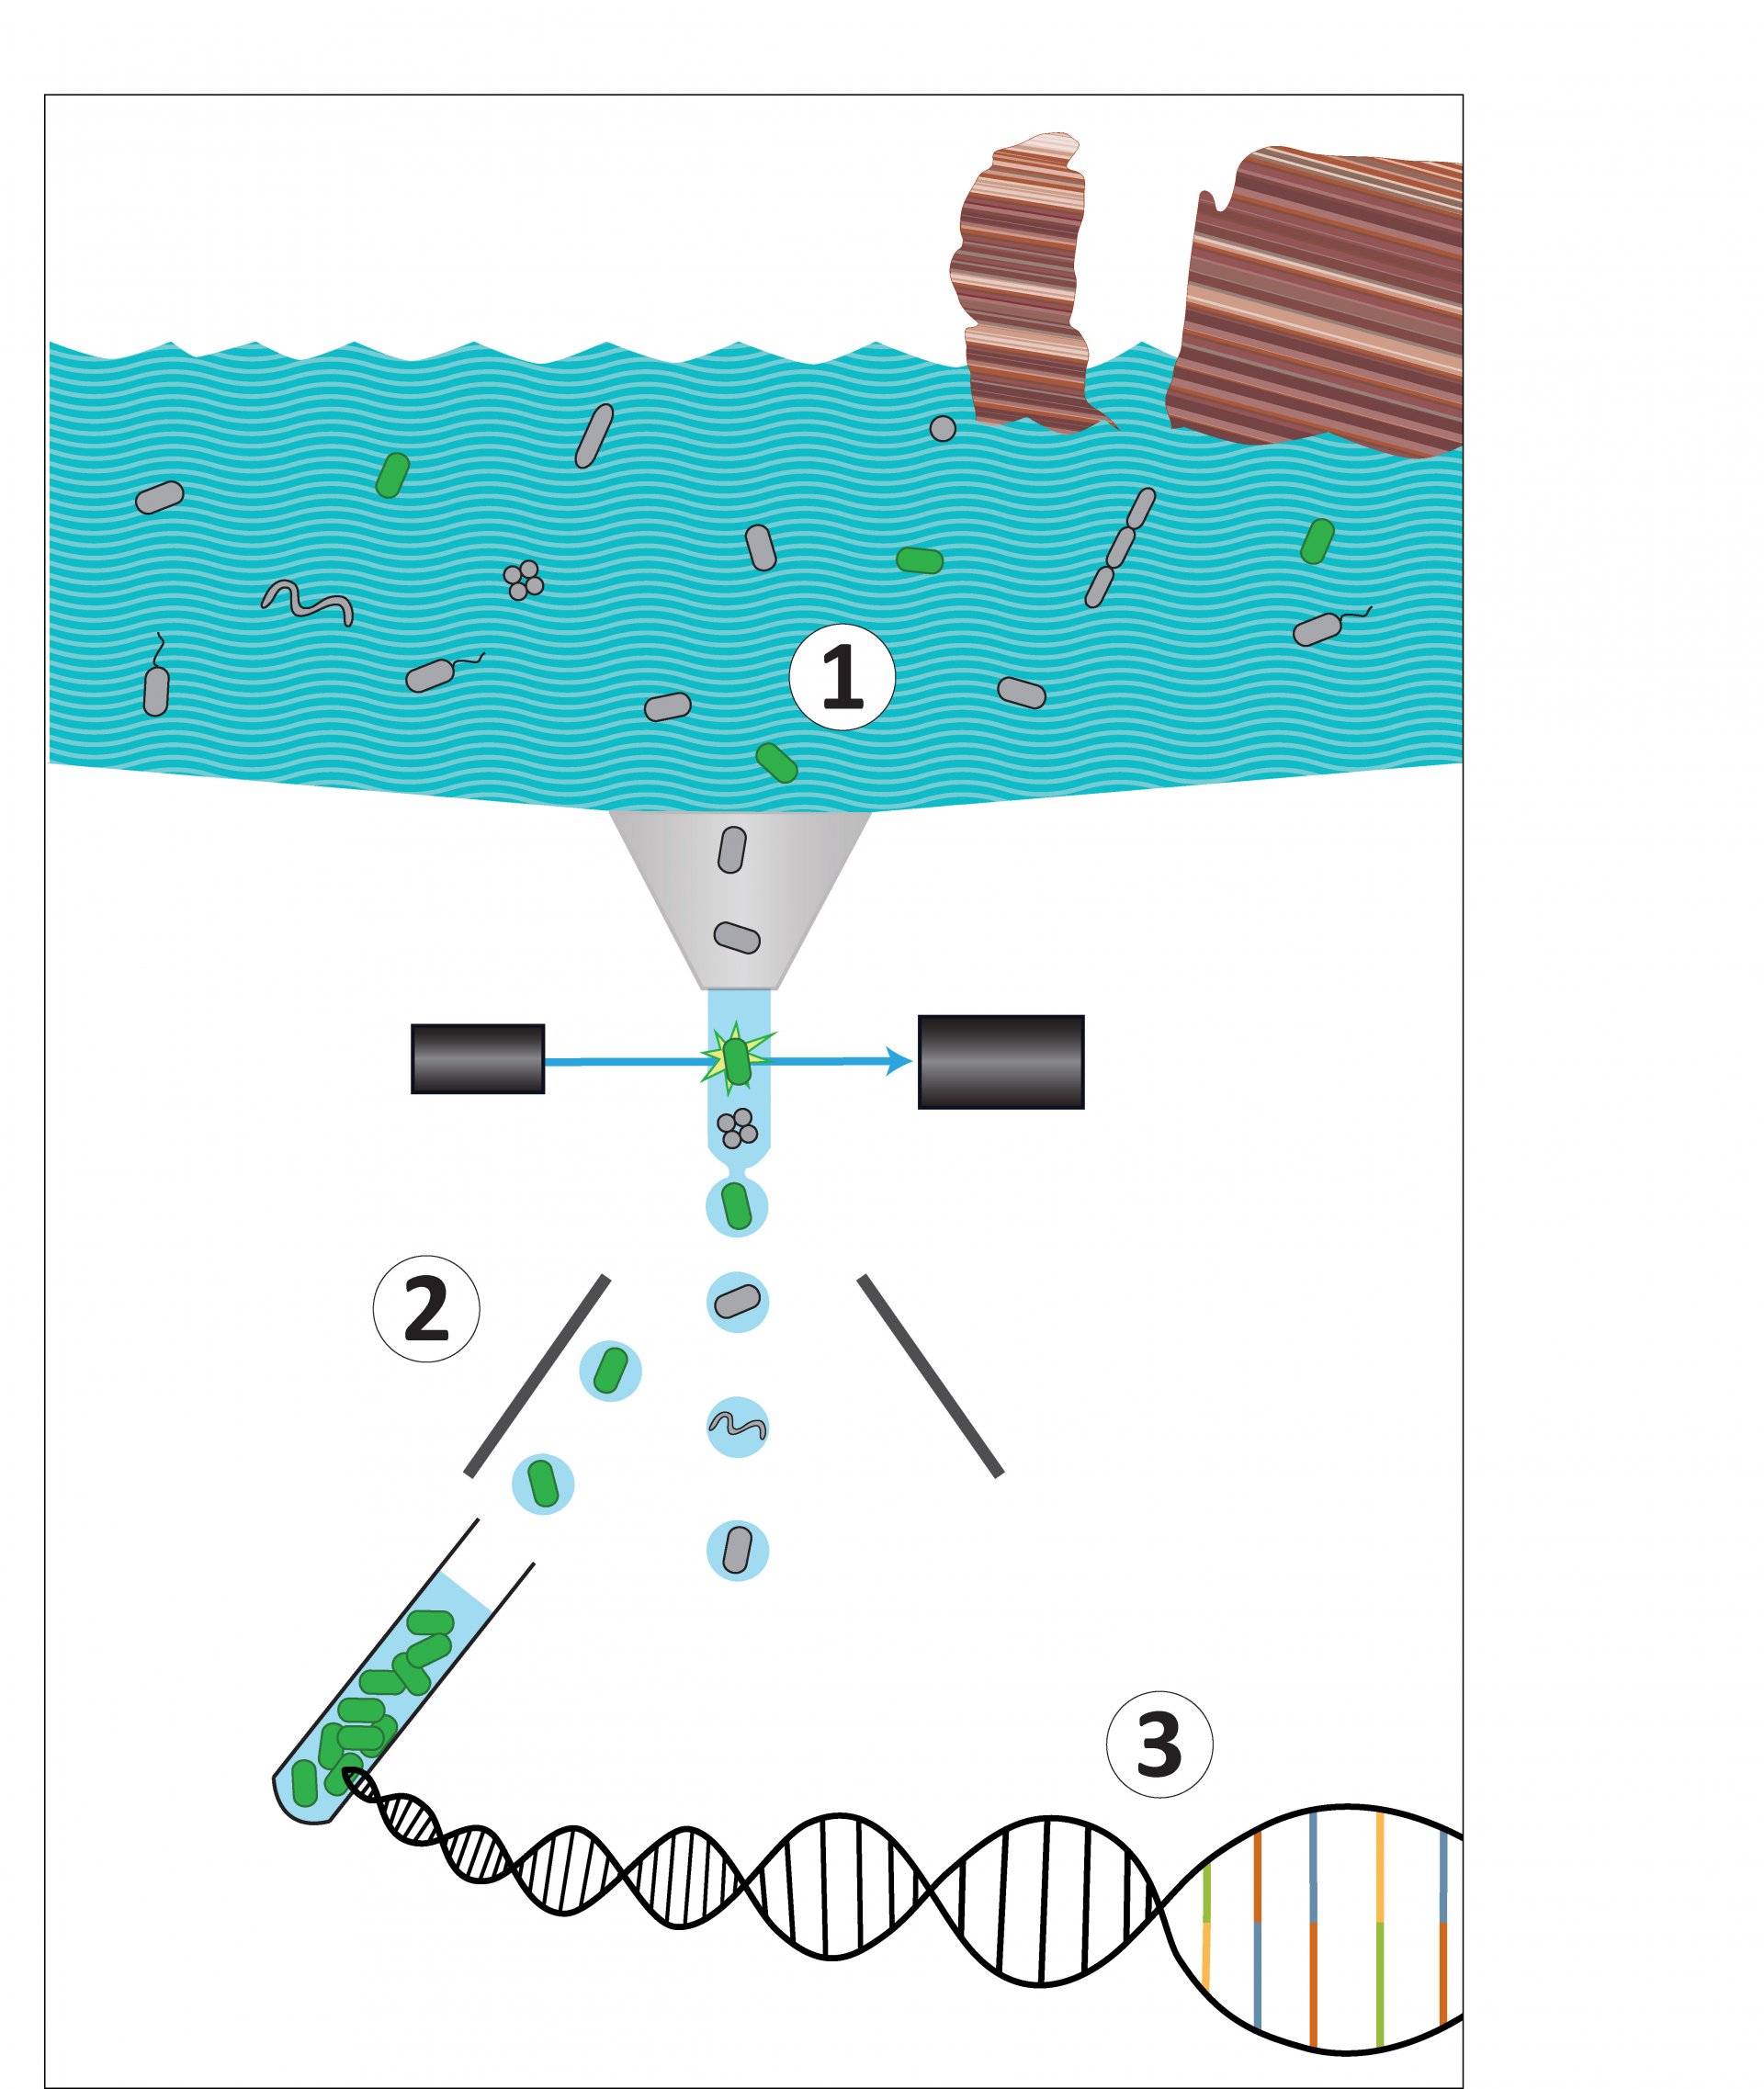 We combine several methods for the specific enrichment of bacteria: (1) Using FISH, we fluorescently label a specific bacterial species of our Helgoland water sample. (2) Based on that signal, cells are sorted. (3) The DNA of that enrichment is sequenced and further analyzed. (© Max Planck Institute for Marine Microbiology, A. Grieb)